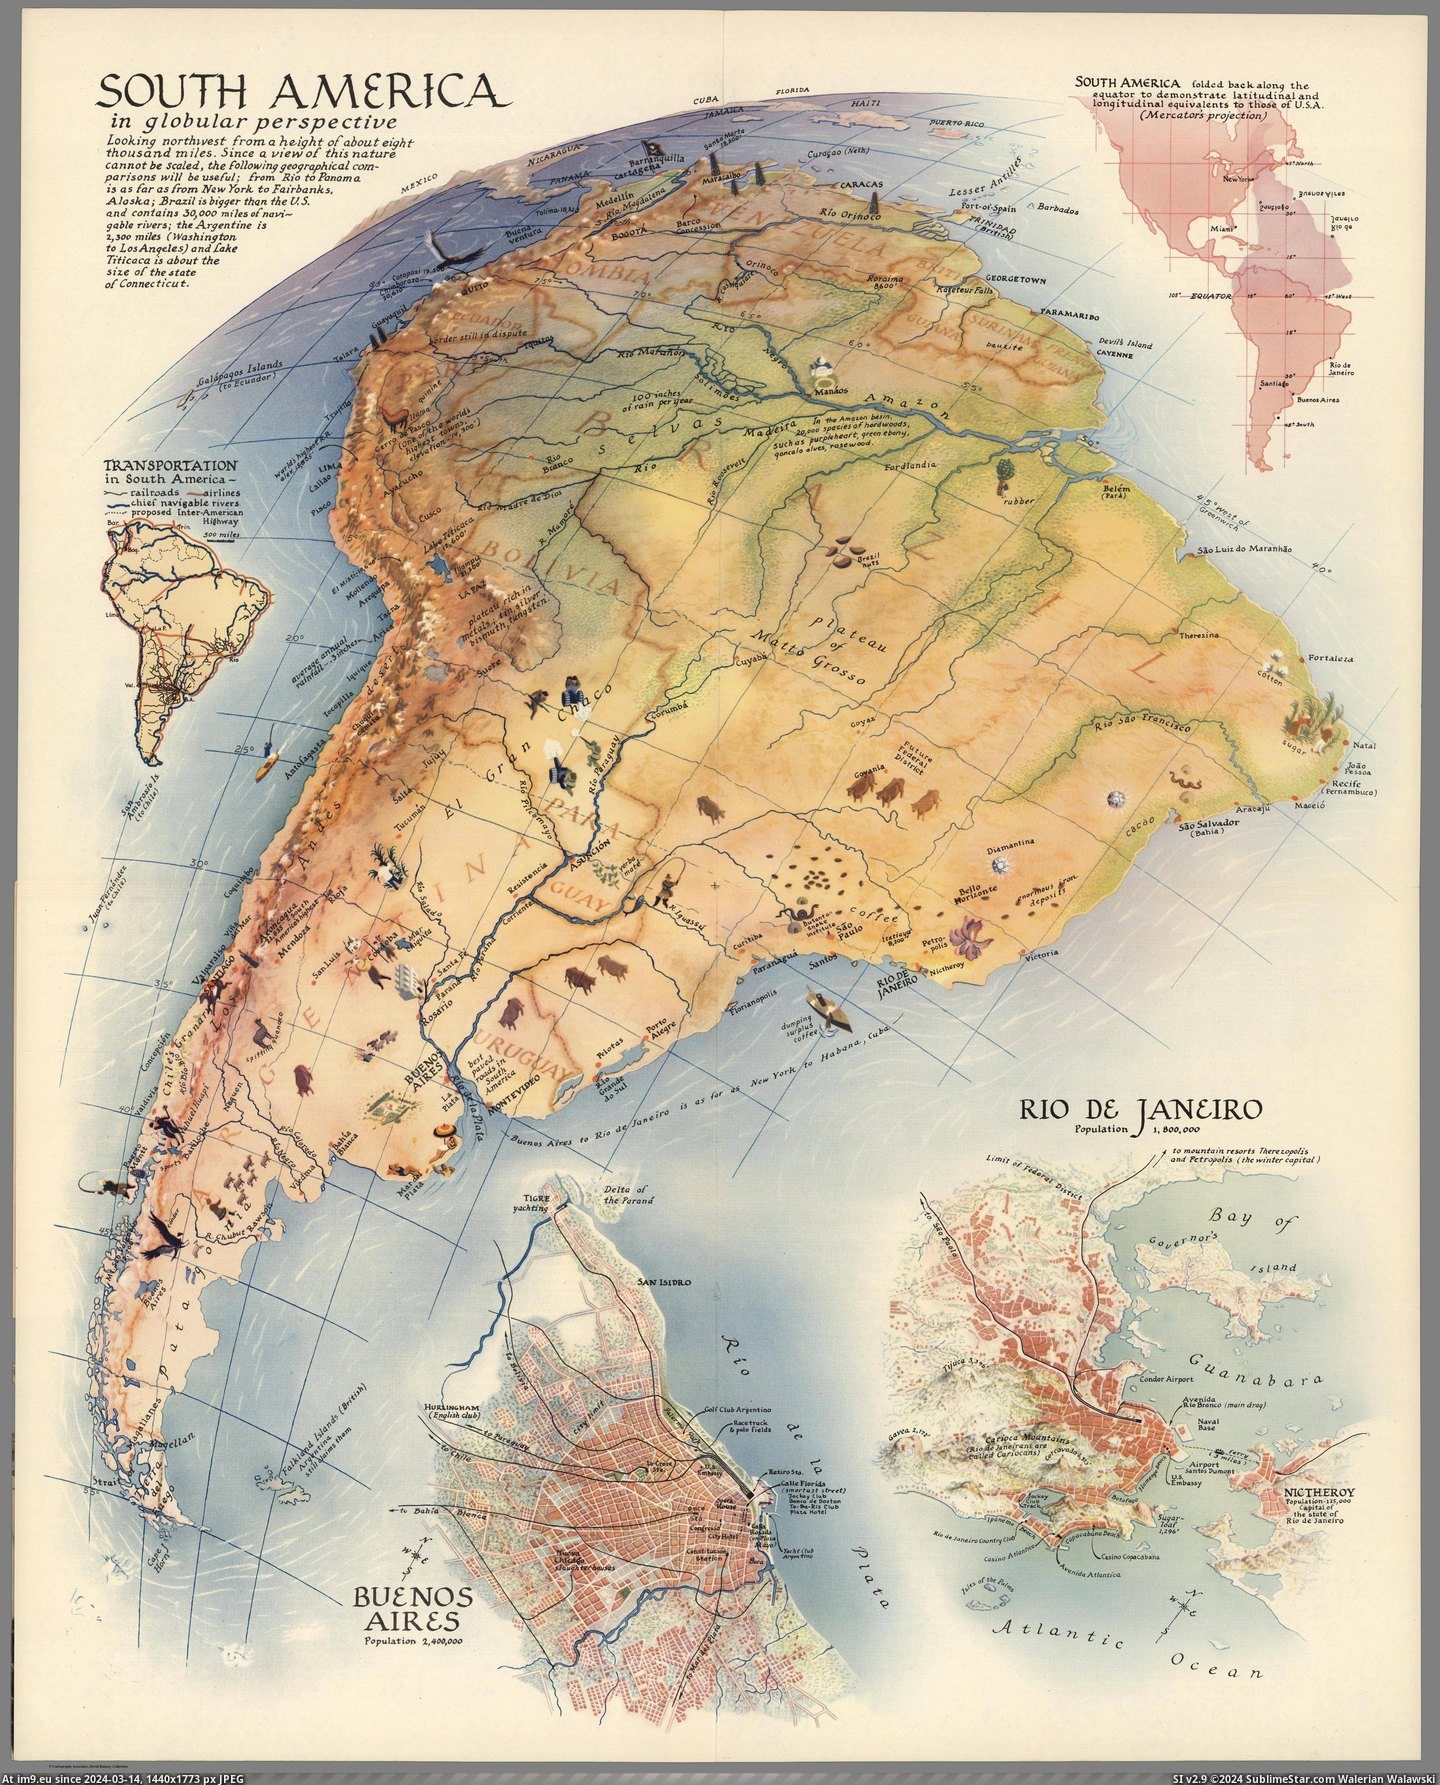 #South #America #Issue #Globular #Foldout #Magaz #Supplement #Perspective #Fortune #Published [Mapporn] South America in globular perspective, published as a foldout supplement from the December 1937 issue of Fortune magaz Pic. (Image of album My r/MAPS favs))